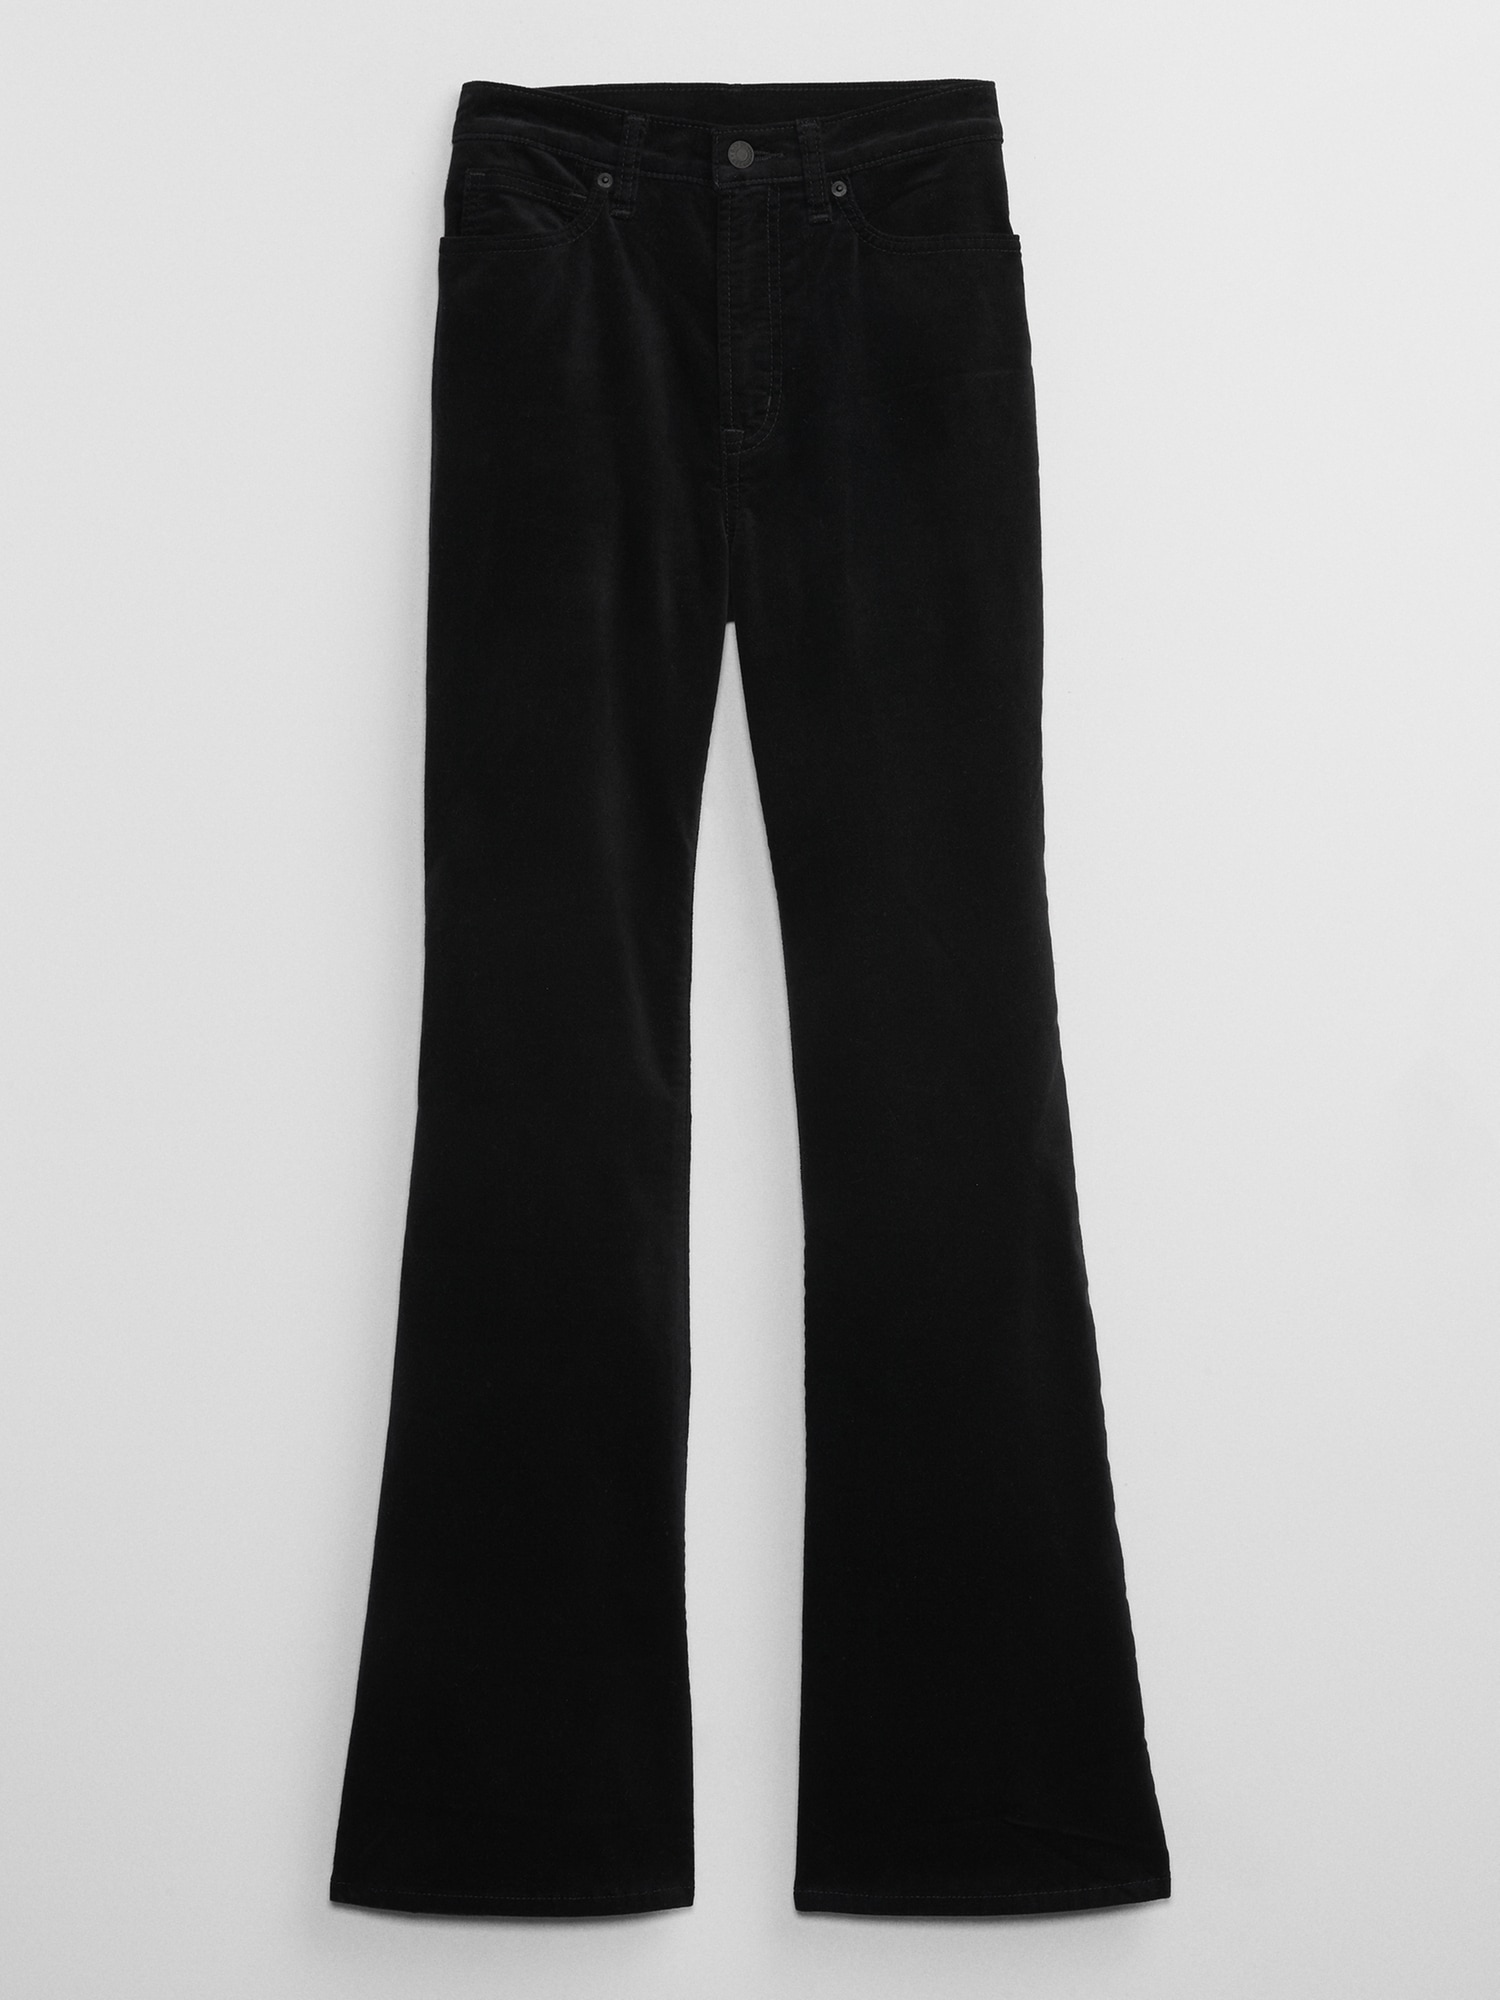  Velvet Flare Pants for Women Vintage 70s Cowgirl High Waist  Bell Bottoms Soft Stretchy Comfy Wide Leg Palazzo Pants Black : Sports &  Outdoors